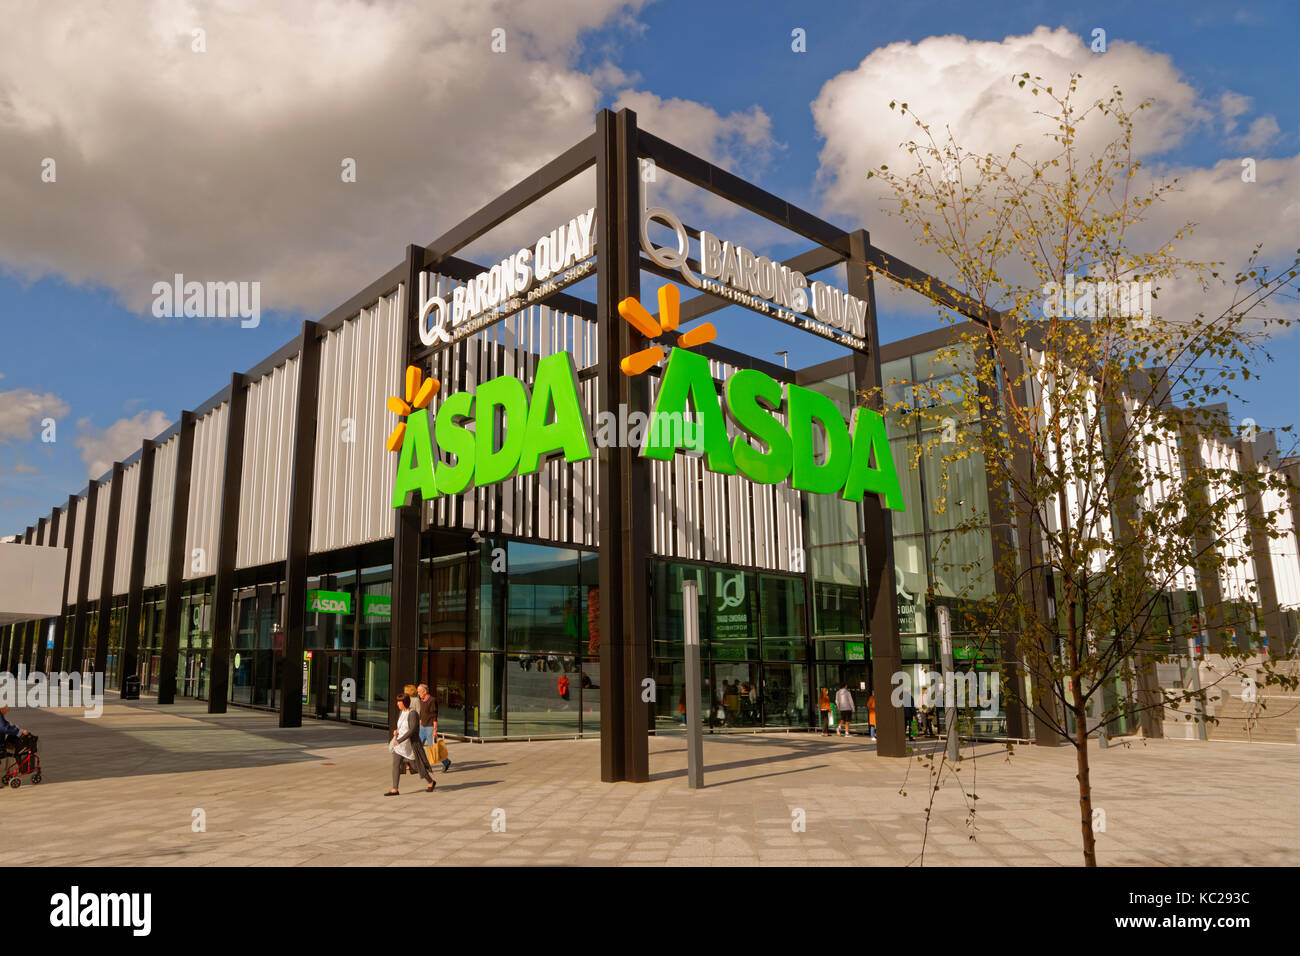 Asda superstore at Barons Quay, Northwich, Cheshire, England, UK. Stock Photo